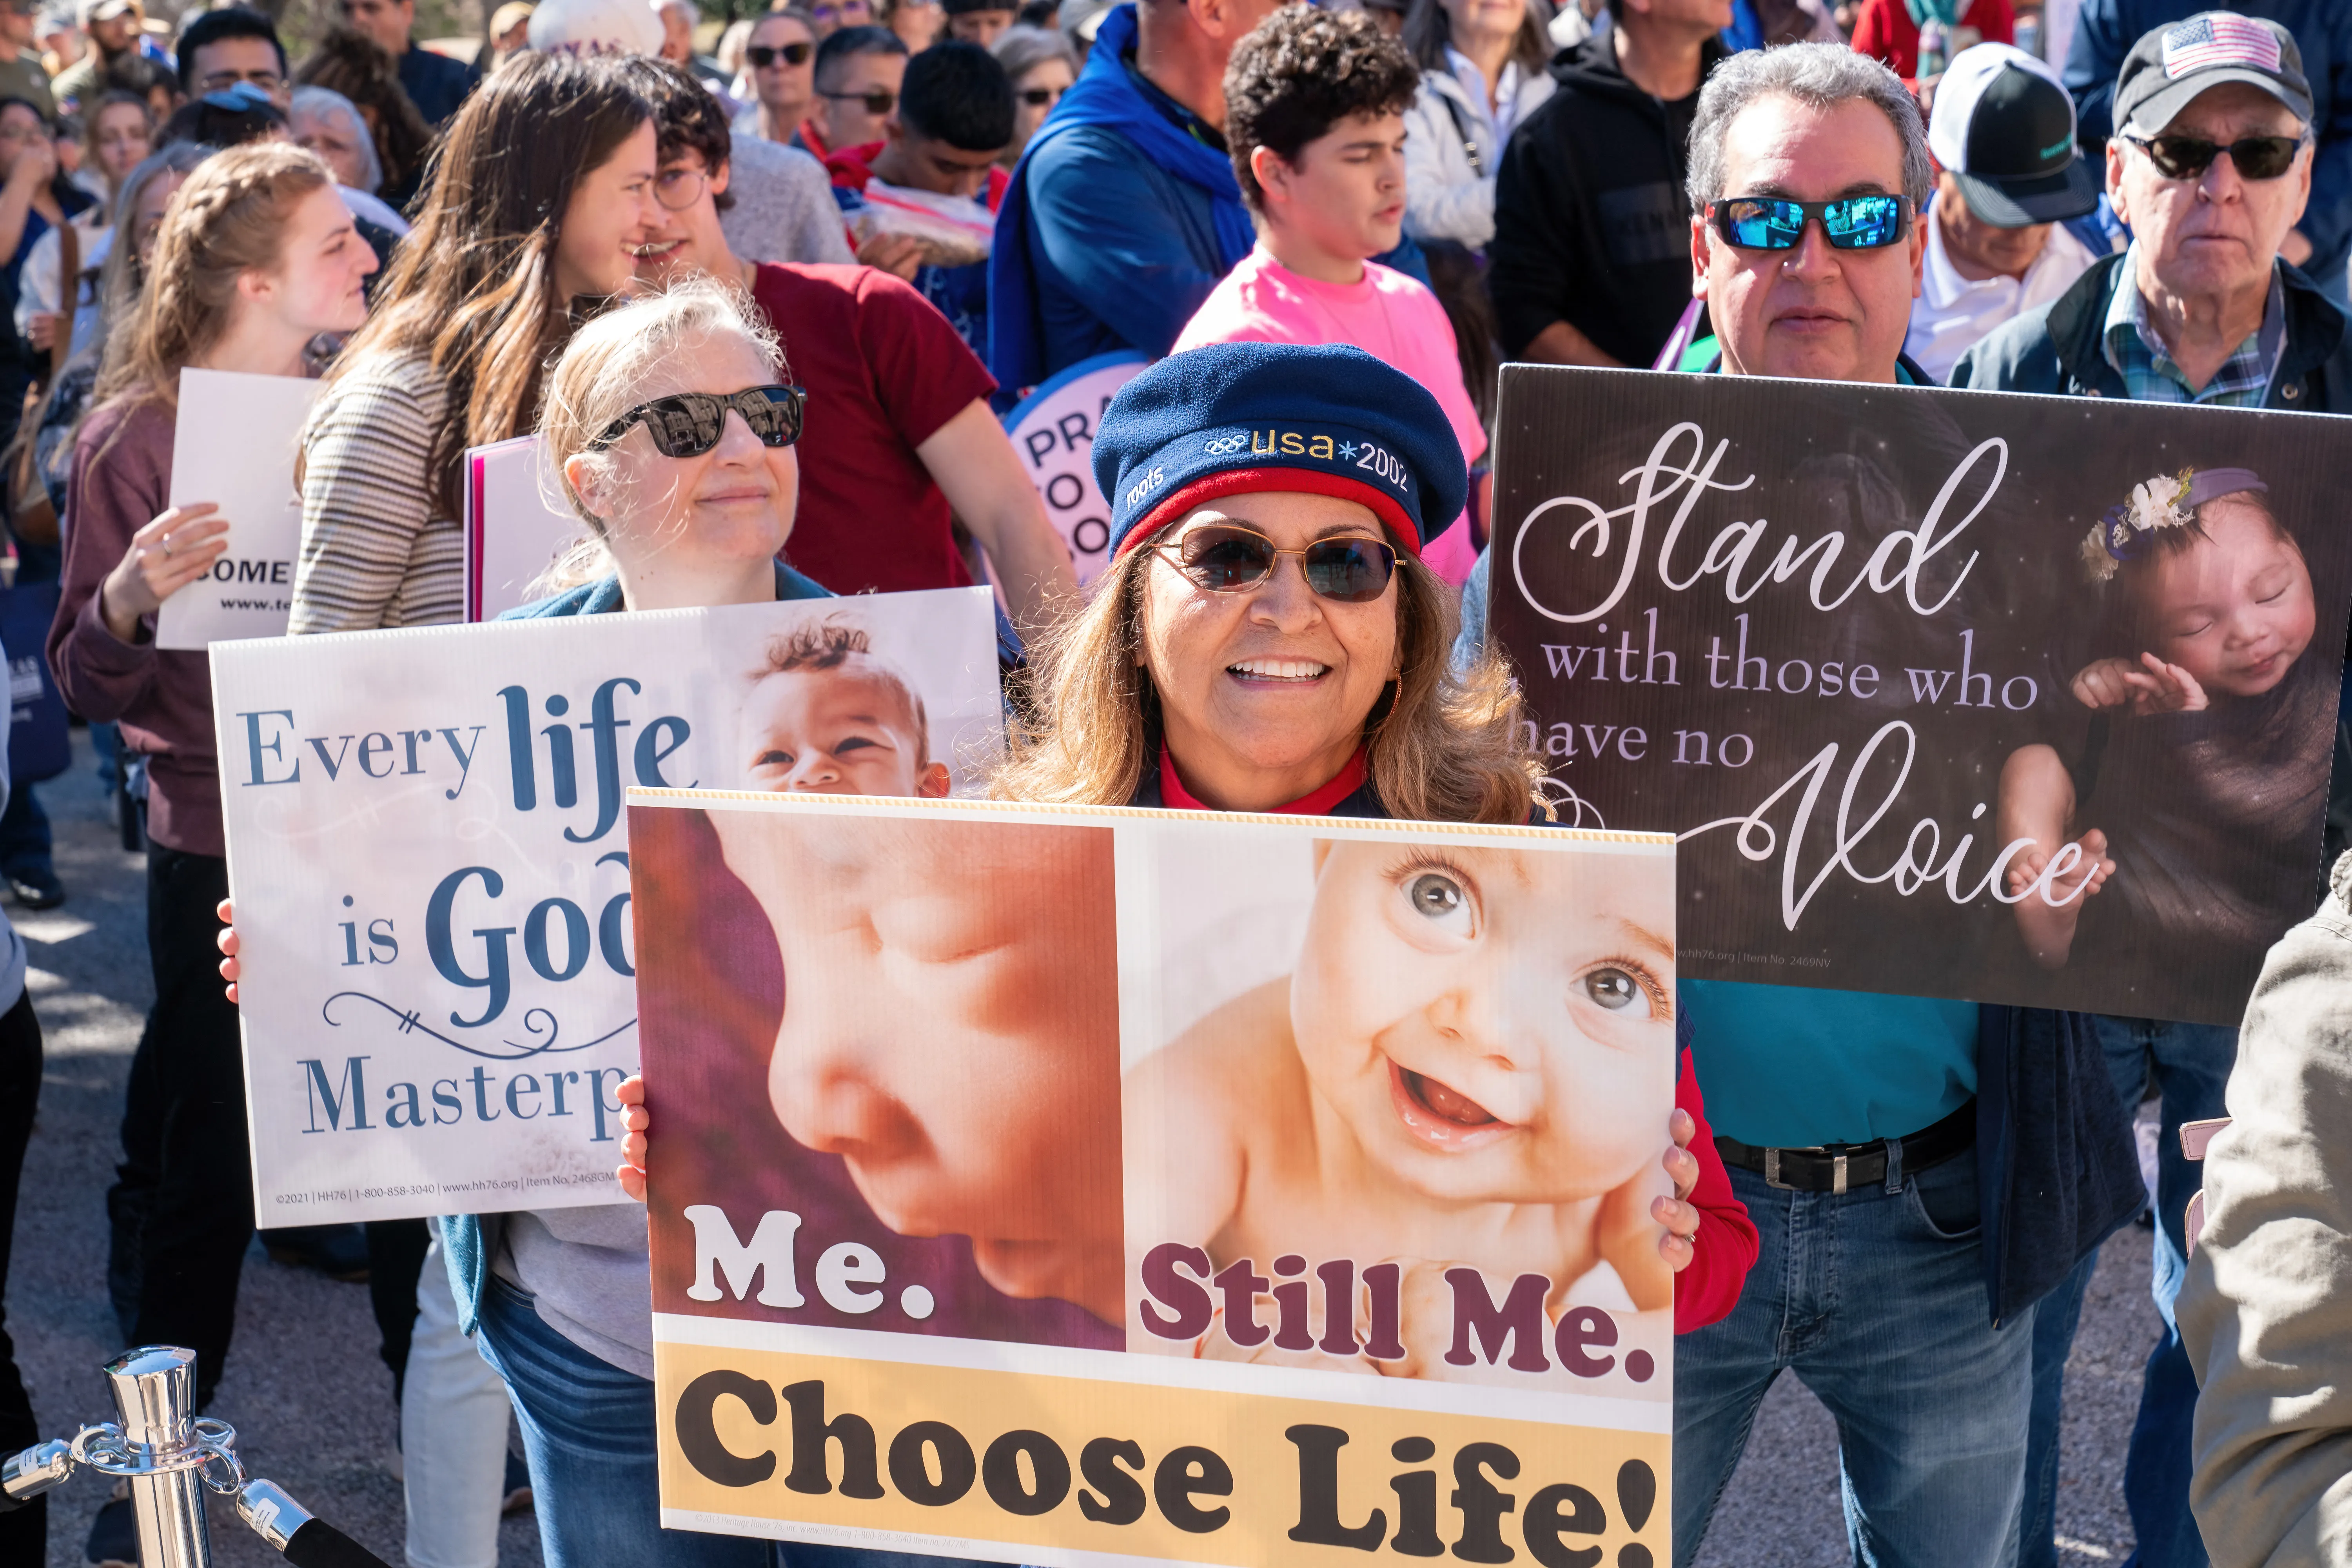 Texas Supreme Court upholds law outlawing abortion even in so-called ‘hard cases’